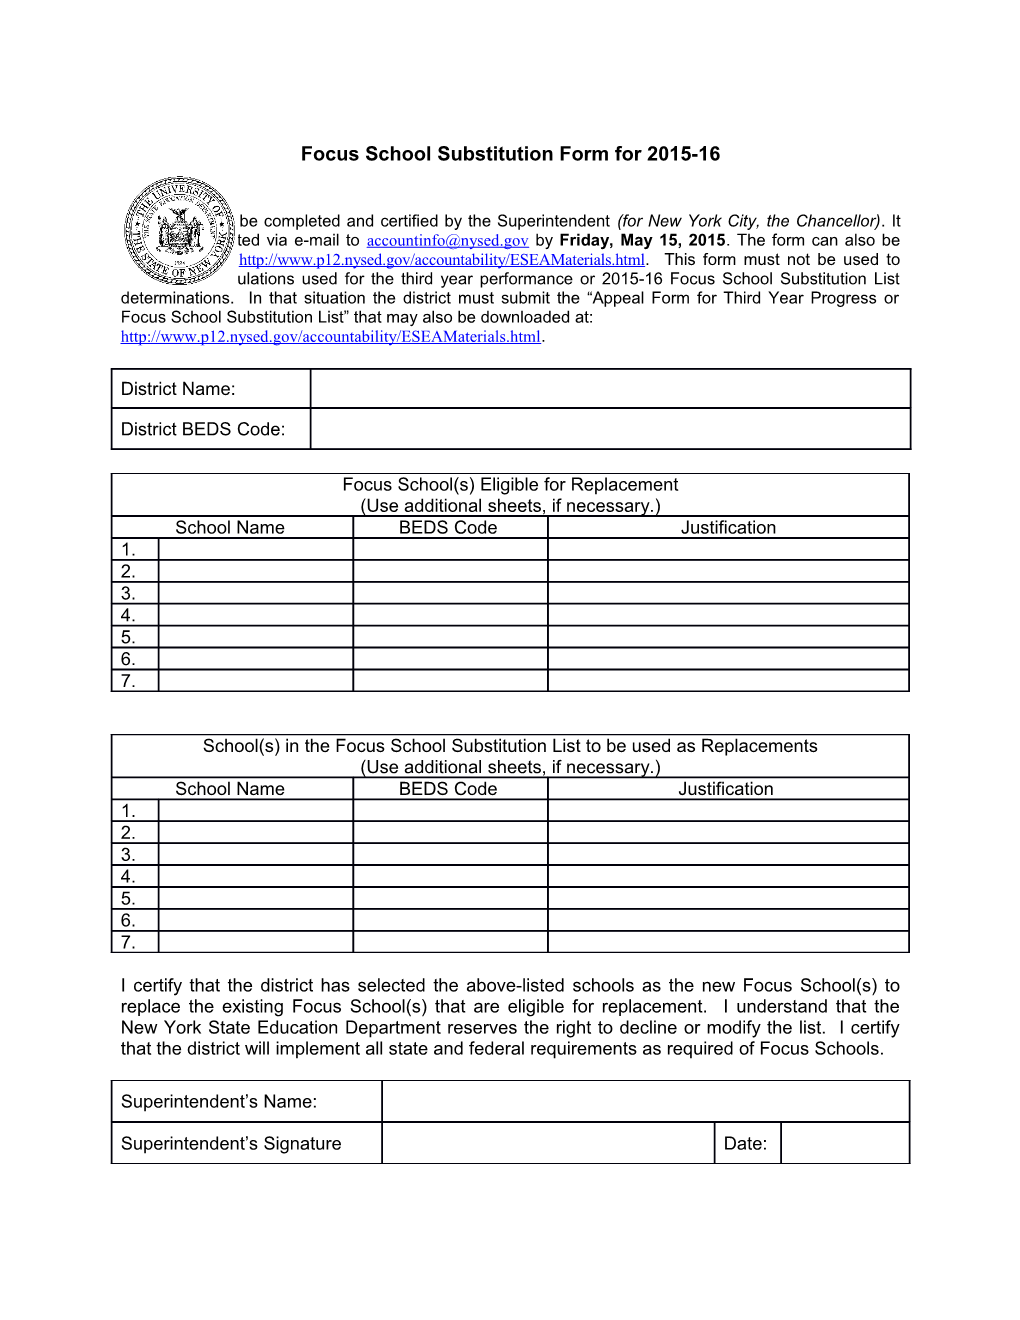 Instructions for Completing the Focus School Substitution Form